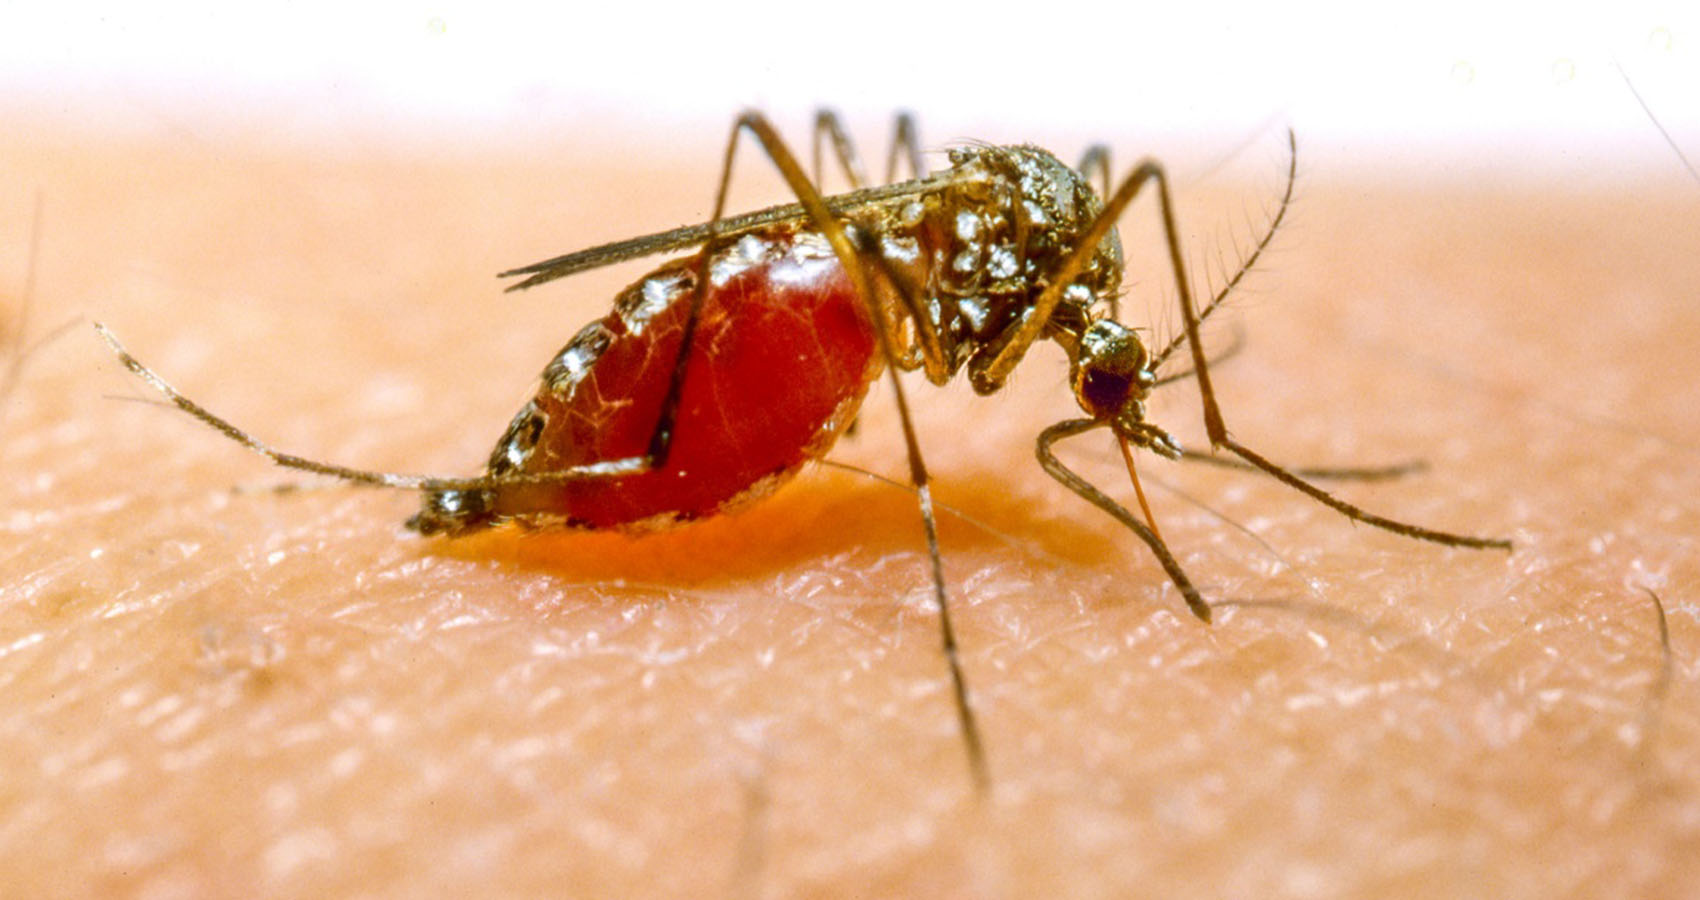 hard to believe facts - Very few mosquito species prefer human blood,